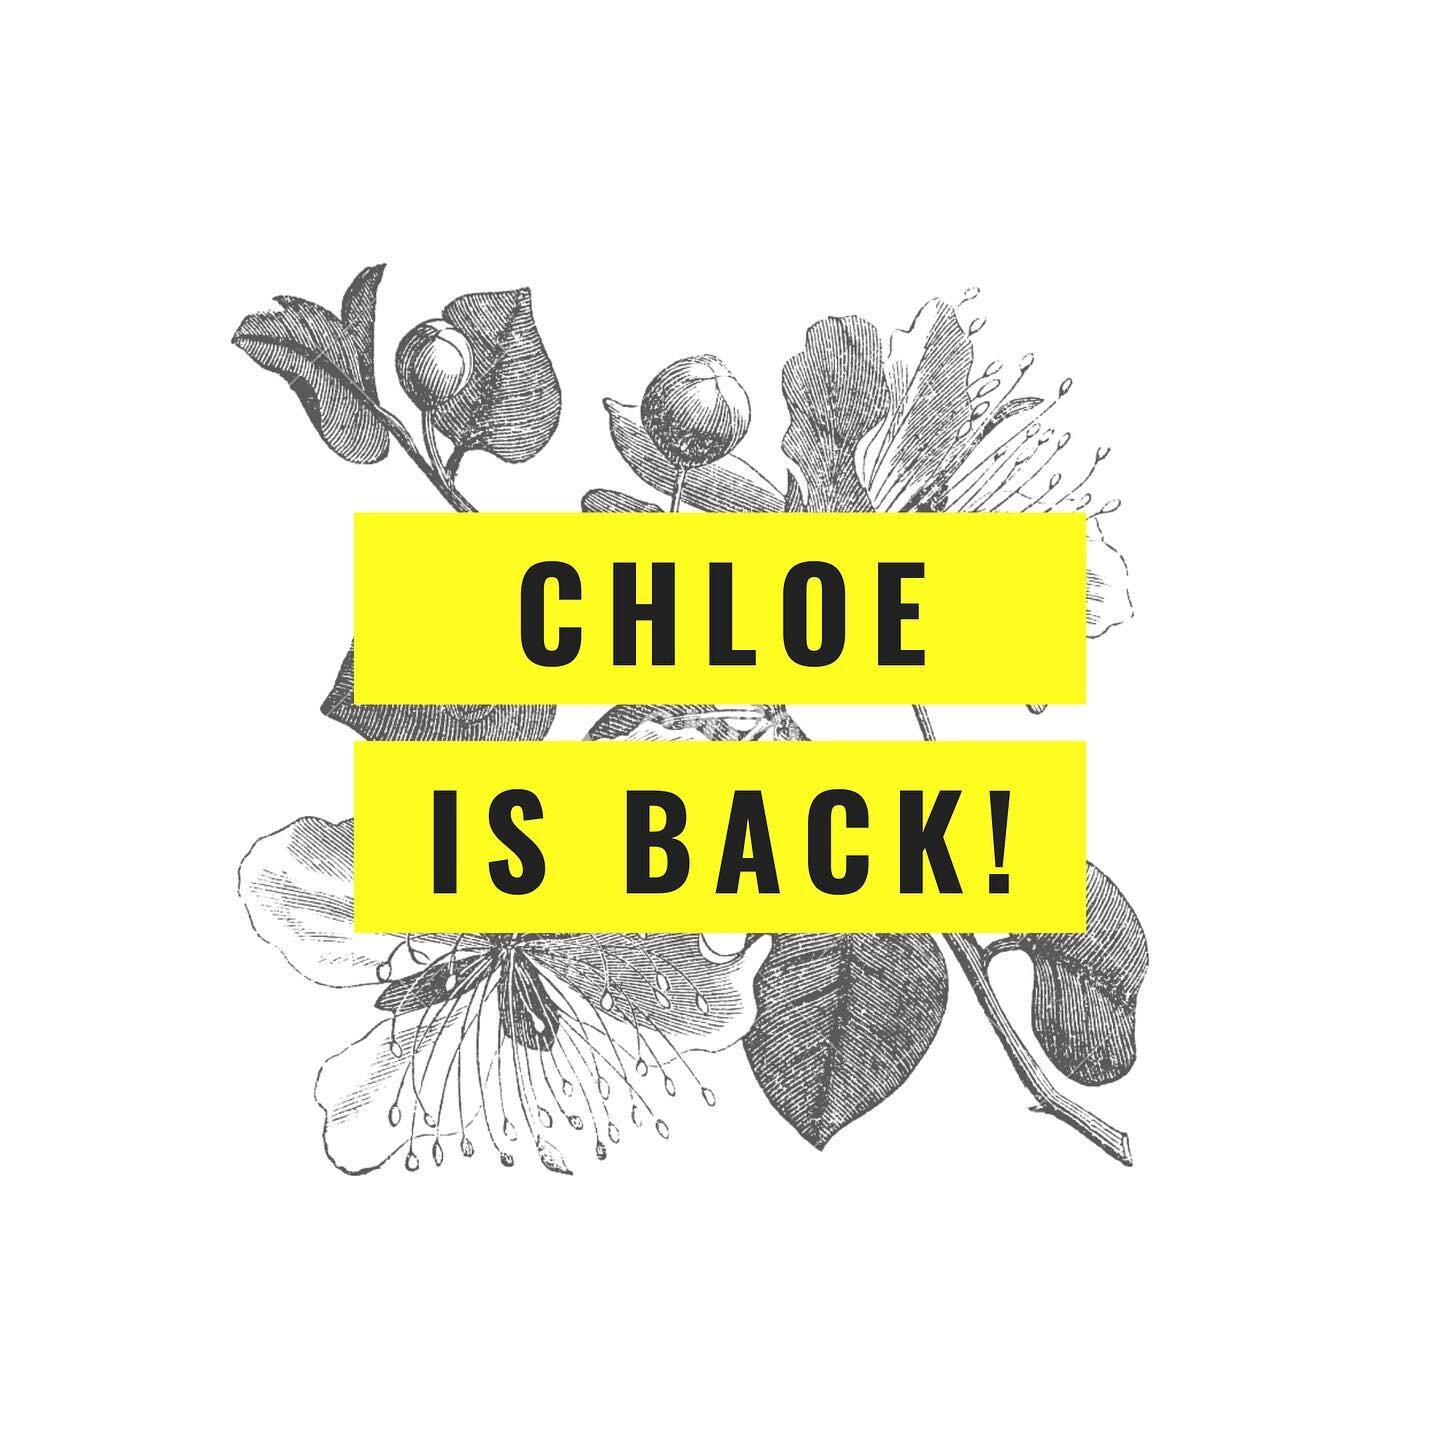 😍😍 Our girl @chloe_hairbystudioa will be back in salon next week! 🙌🏼
She will be available for bookings on Fridays and Saturdays.
⚡️Online bookings are now open for Chloe.
If you have an upcoming appointment that you wish to change over to Chloe 